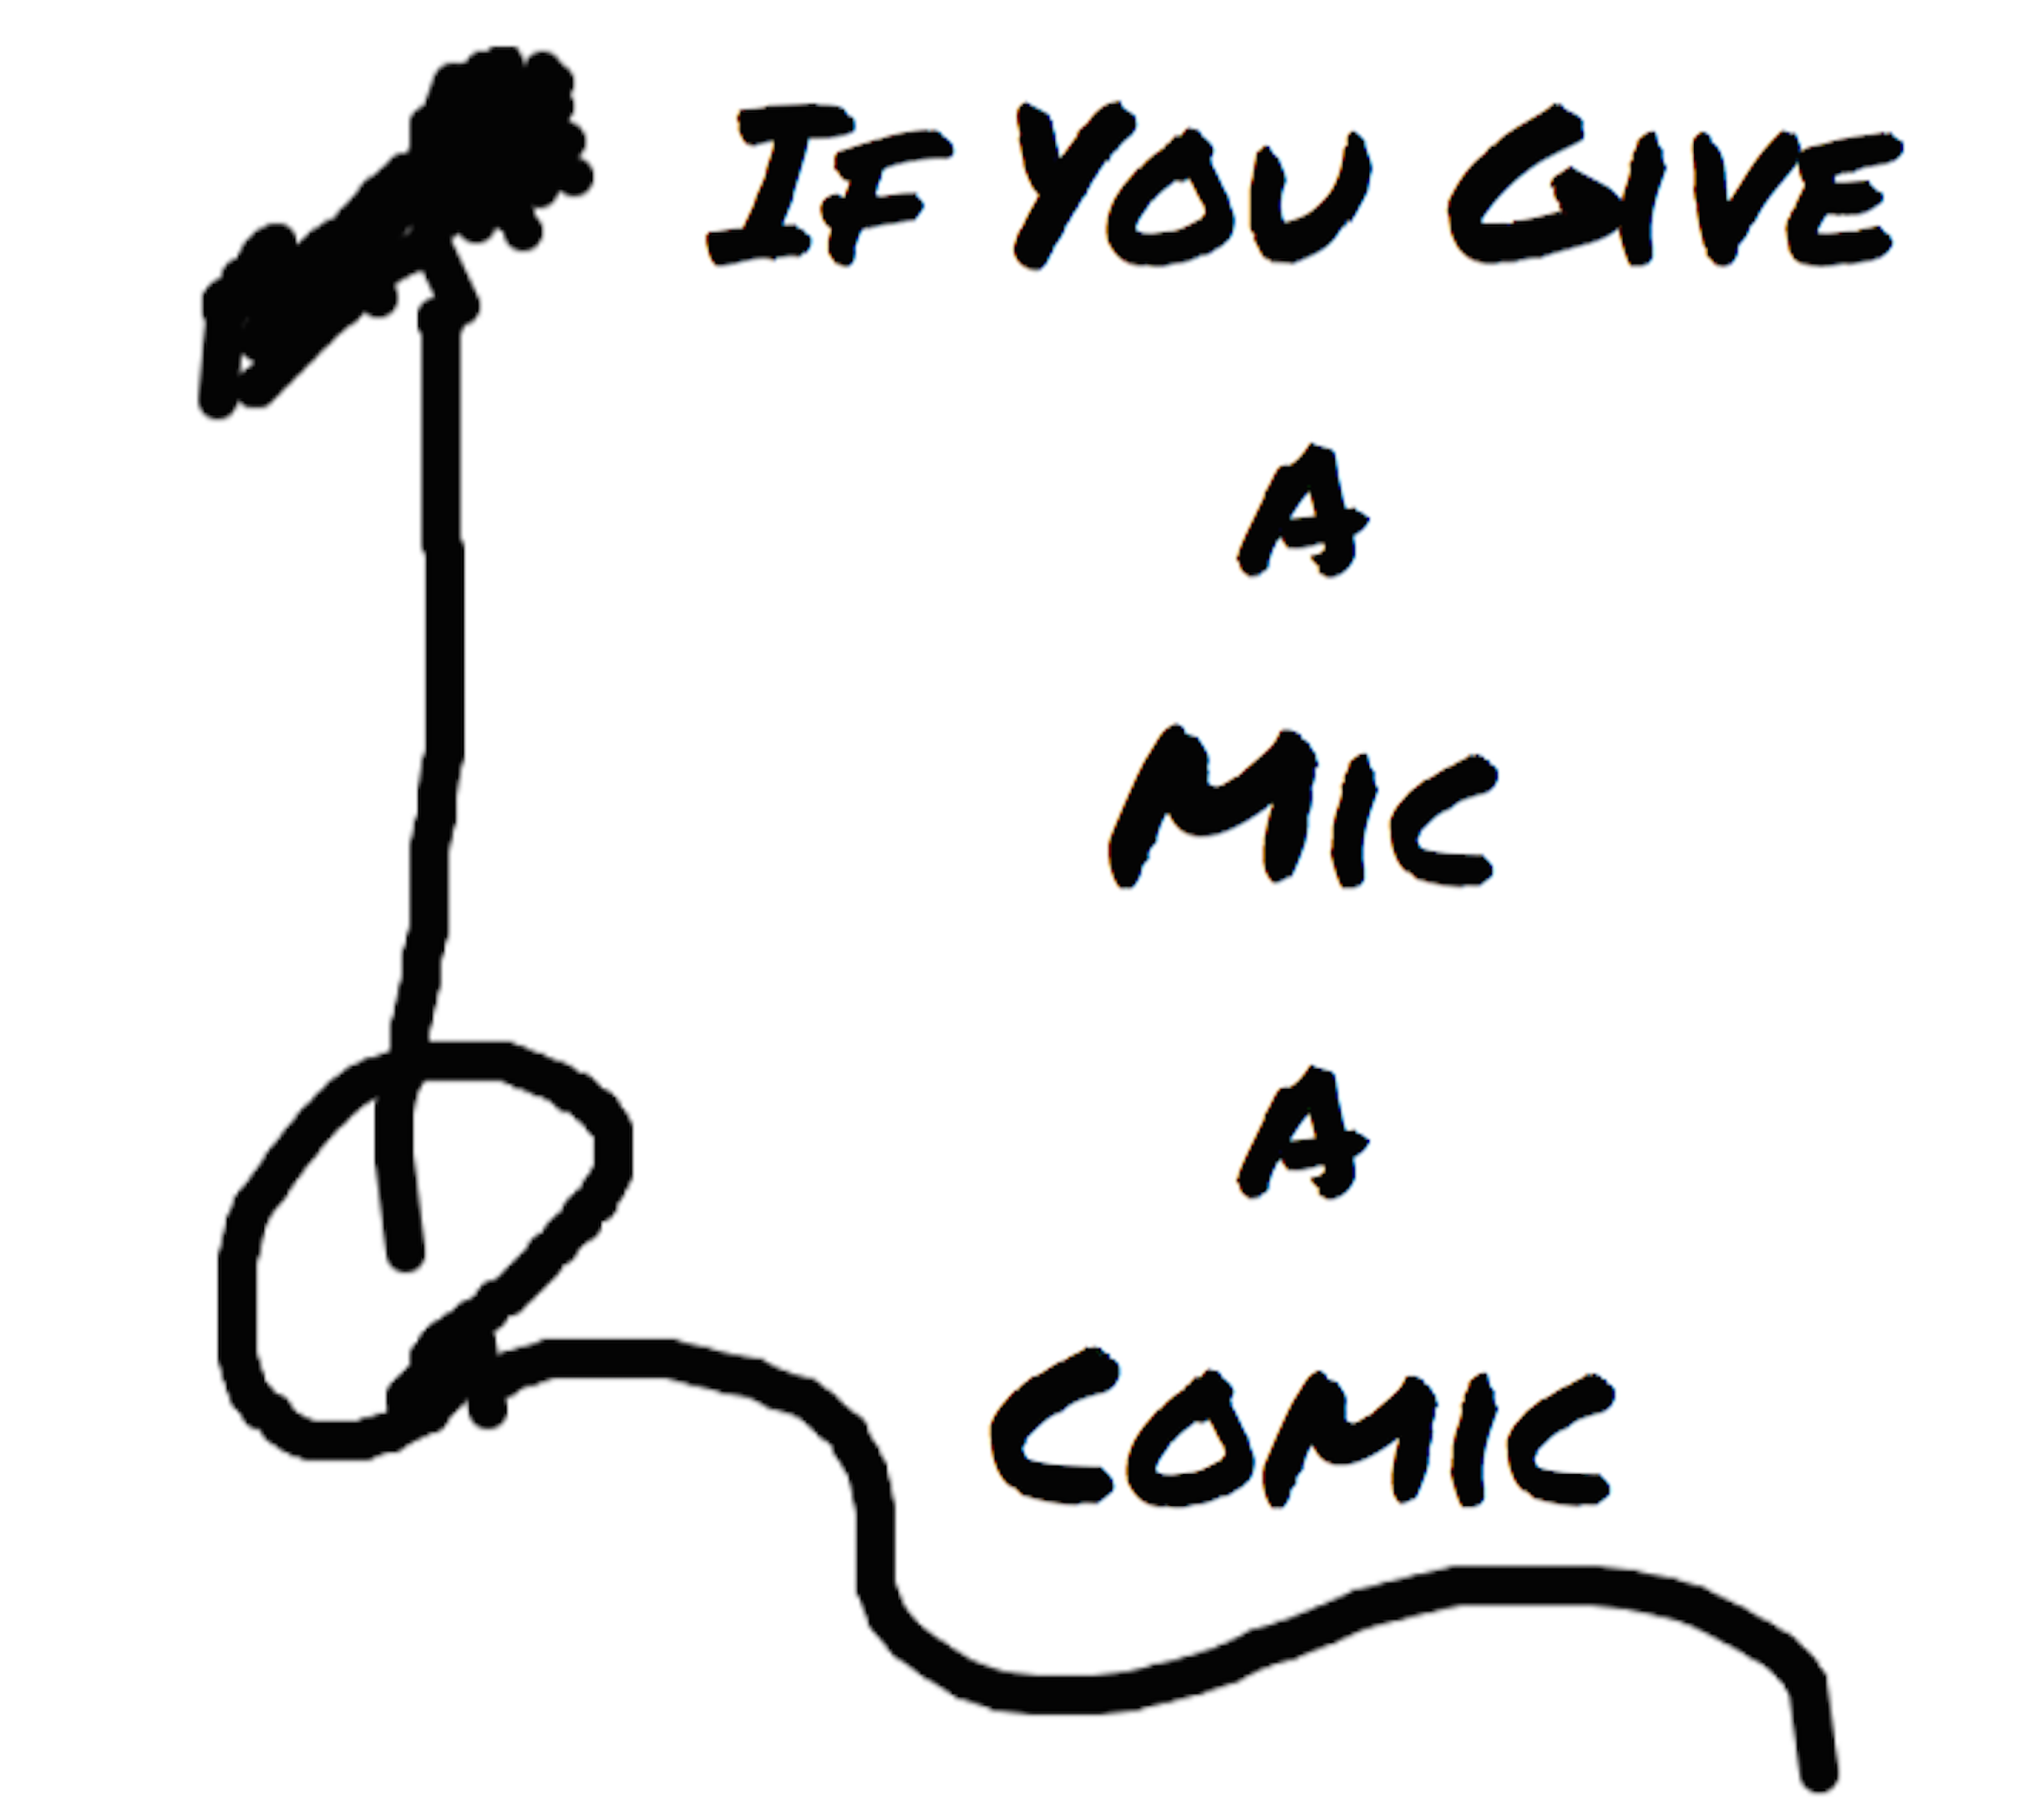 If You Give a Mic a Comic